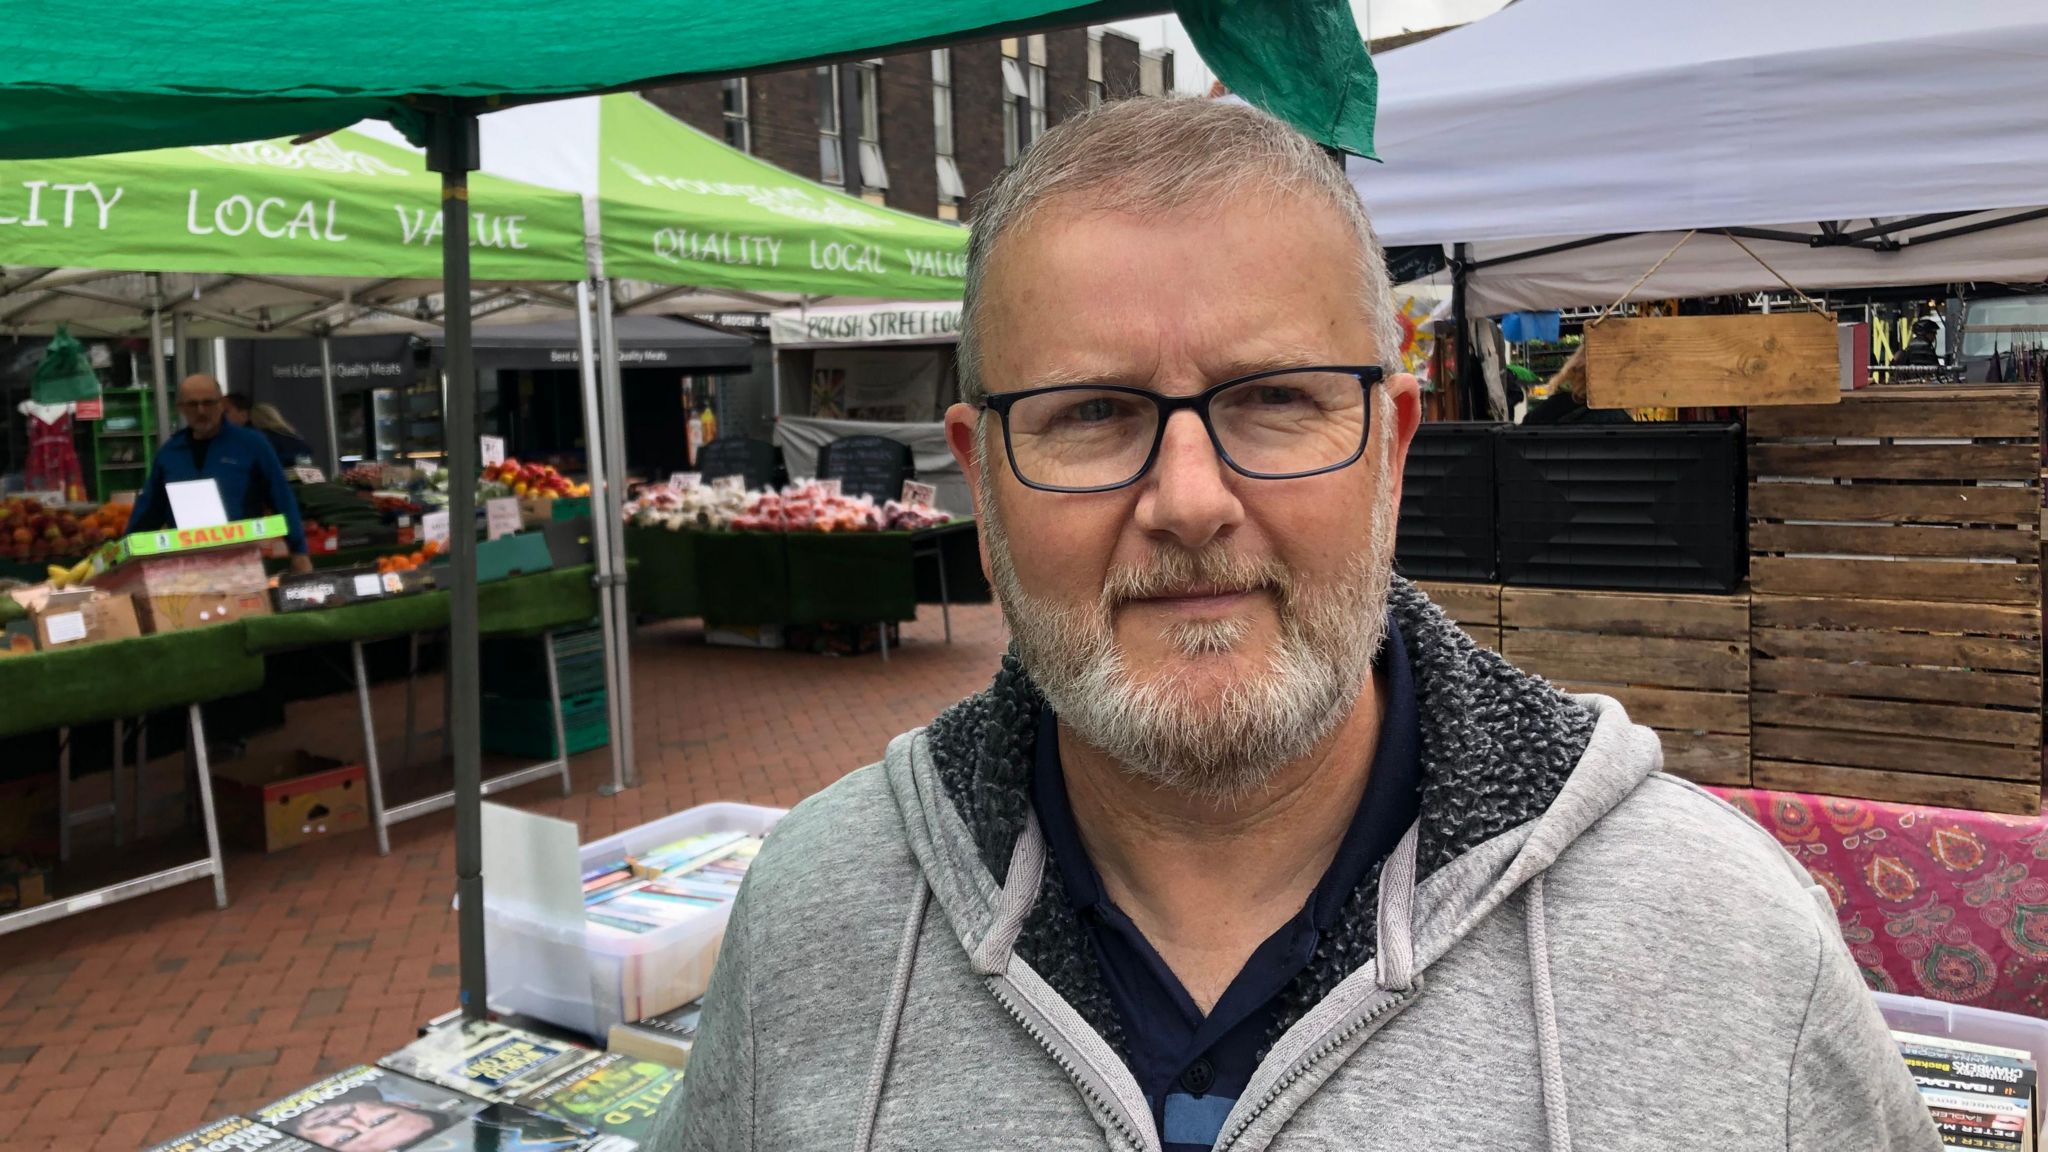 Andrew Sizer standing by a book market stall in Ely